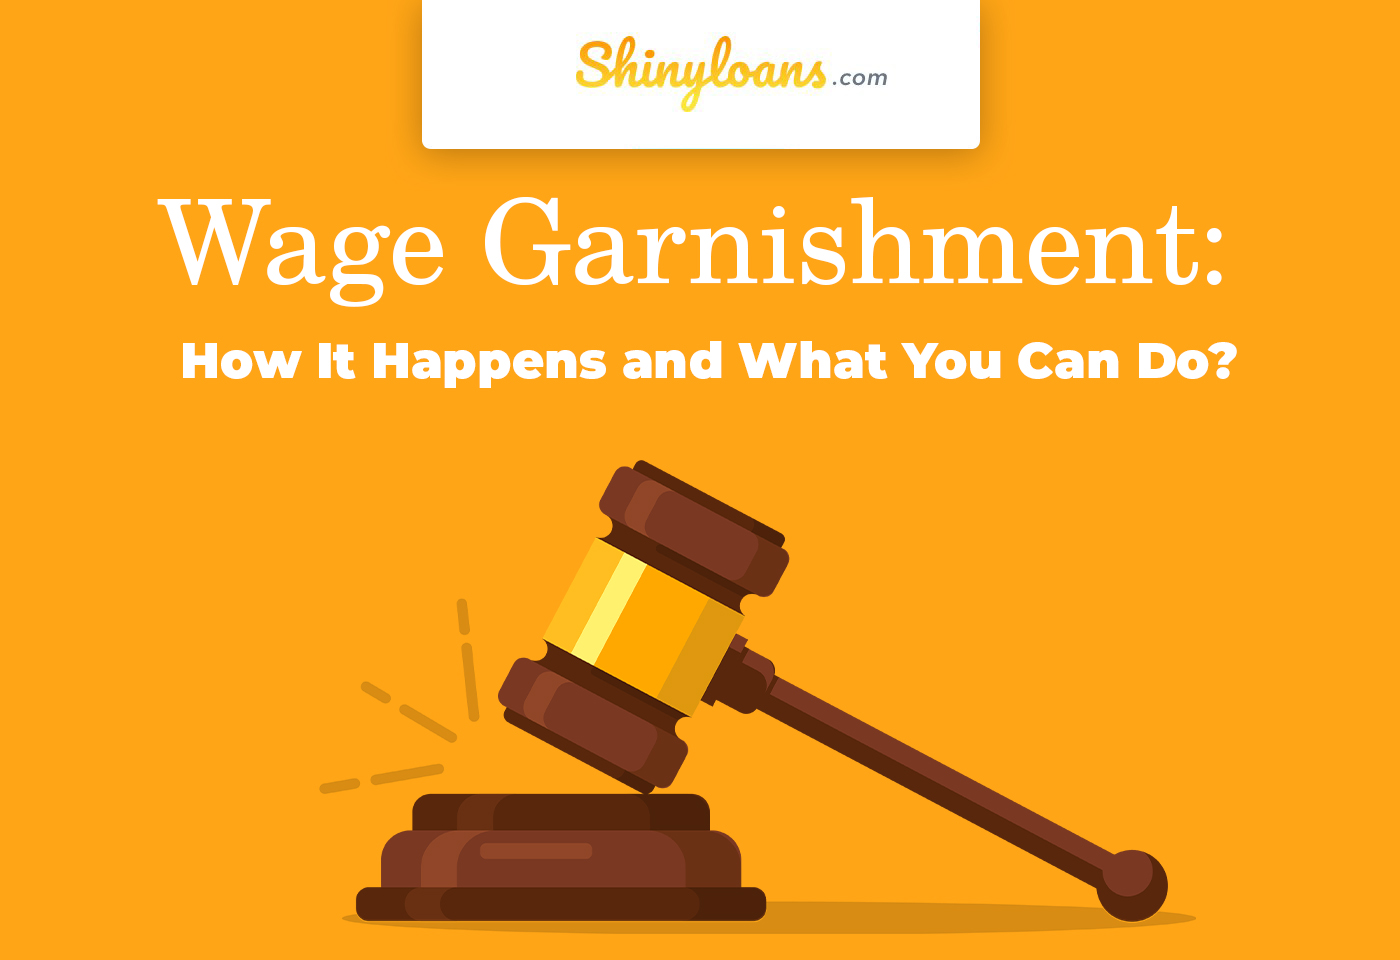 Wage Garnishment: How It Happens and What You Can Do?